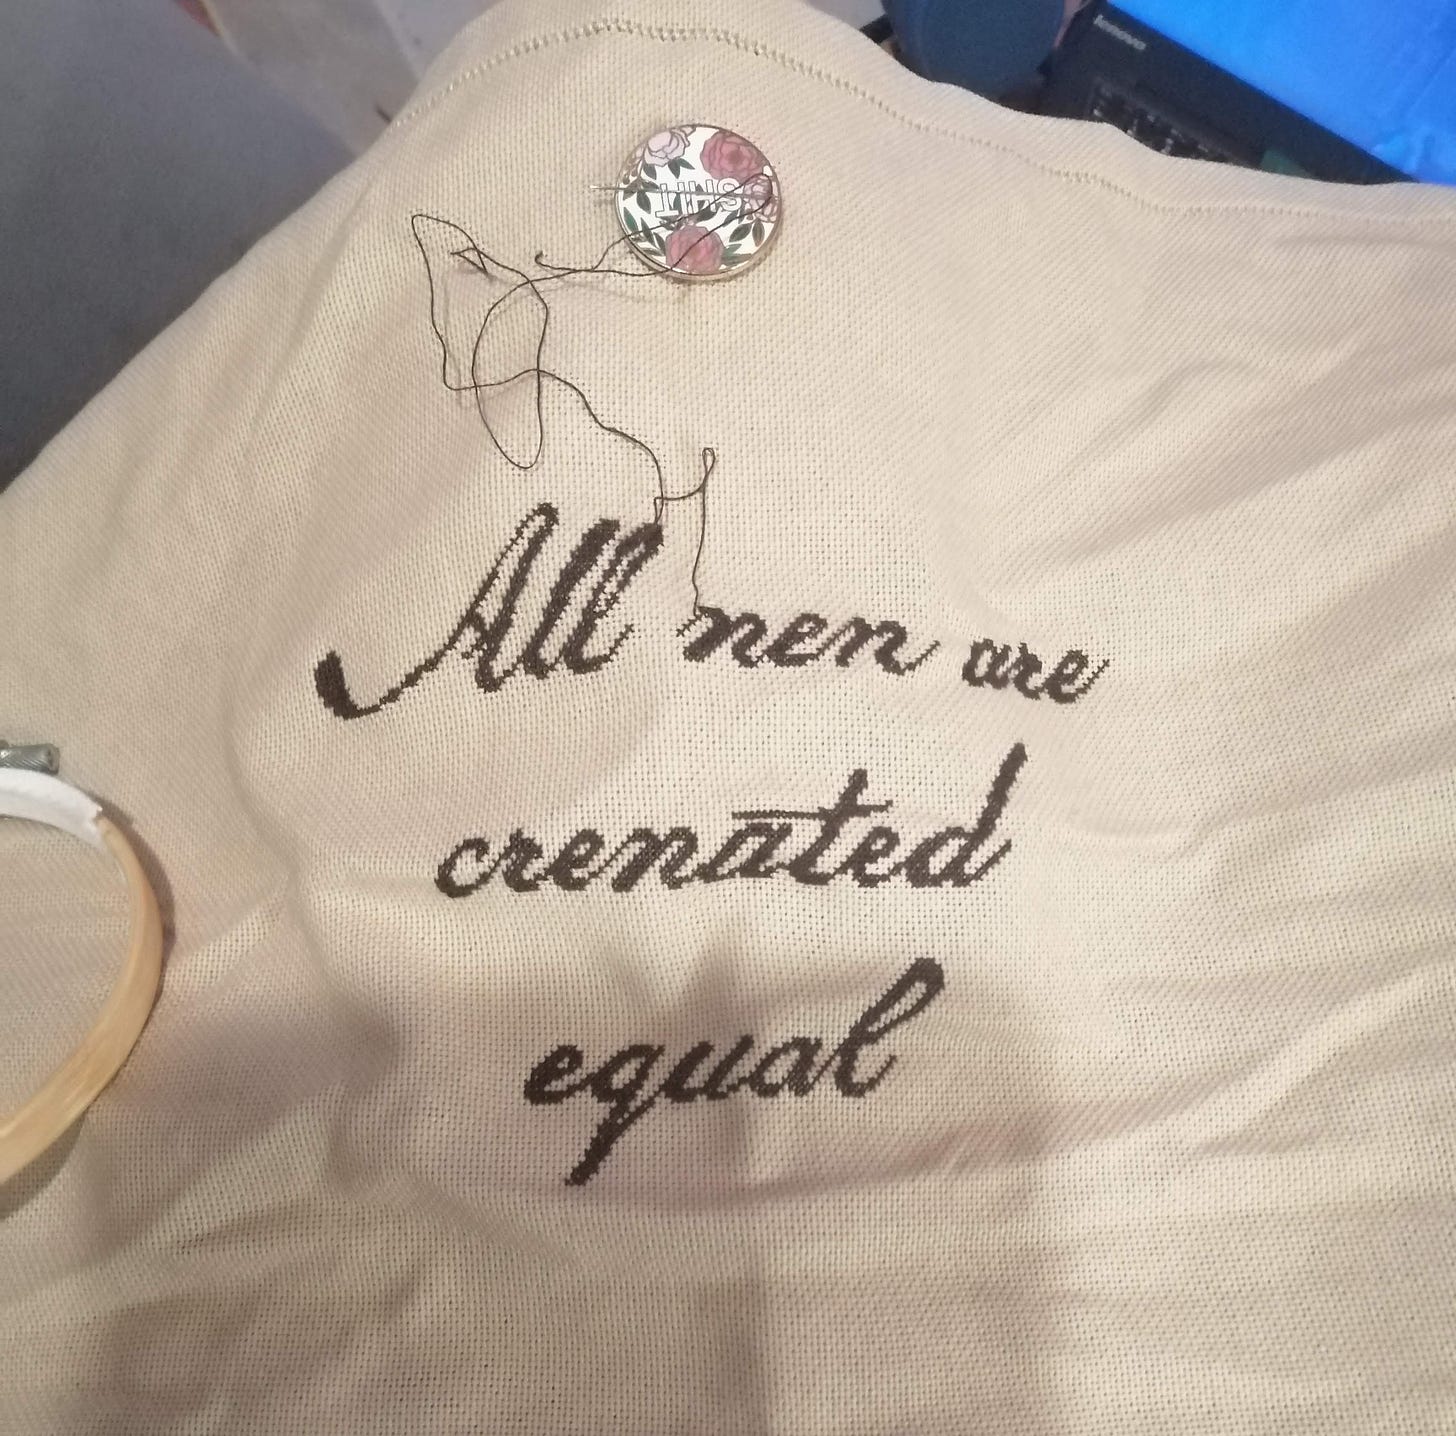 Cross stitch fresh off the hoop. The text reads "All nen are crenated equal"